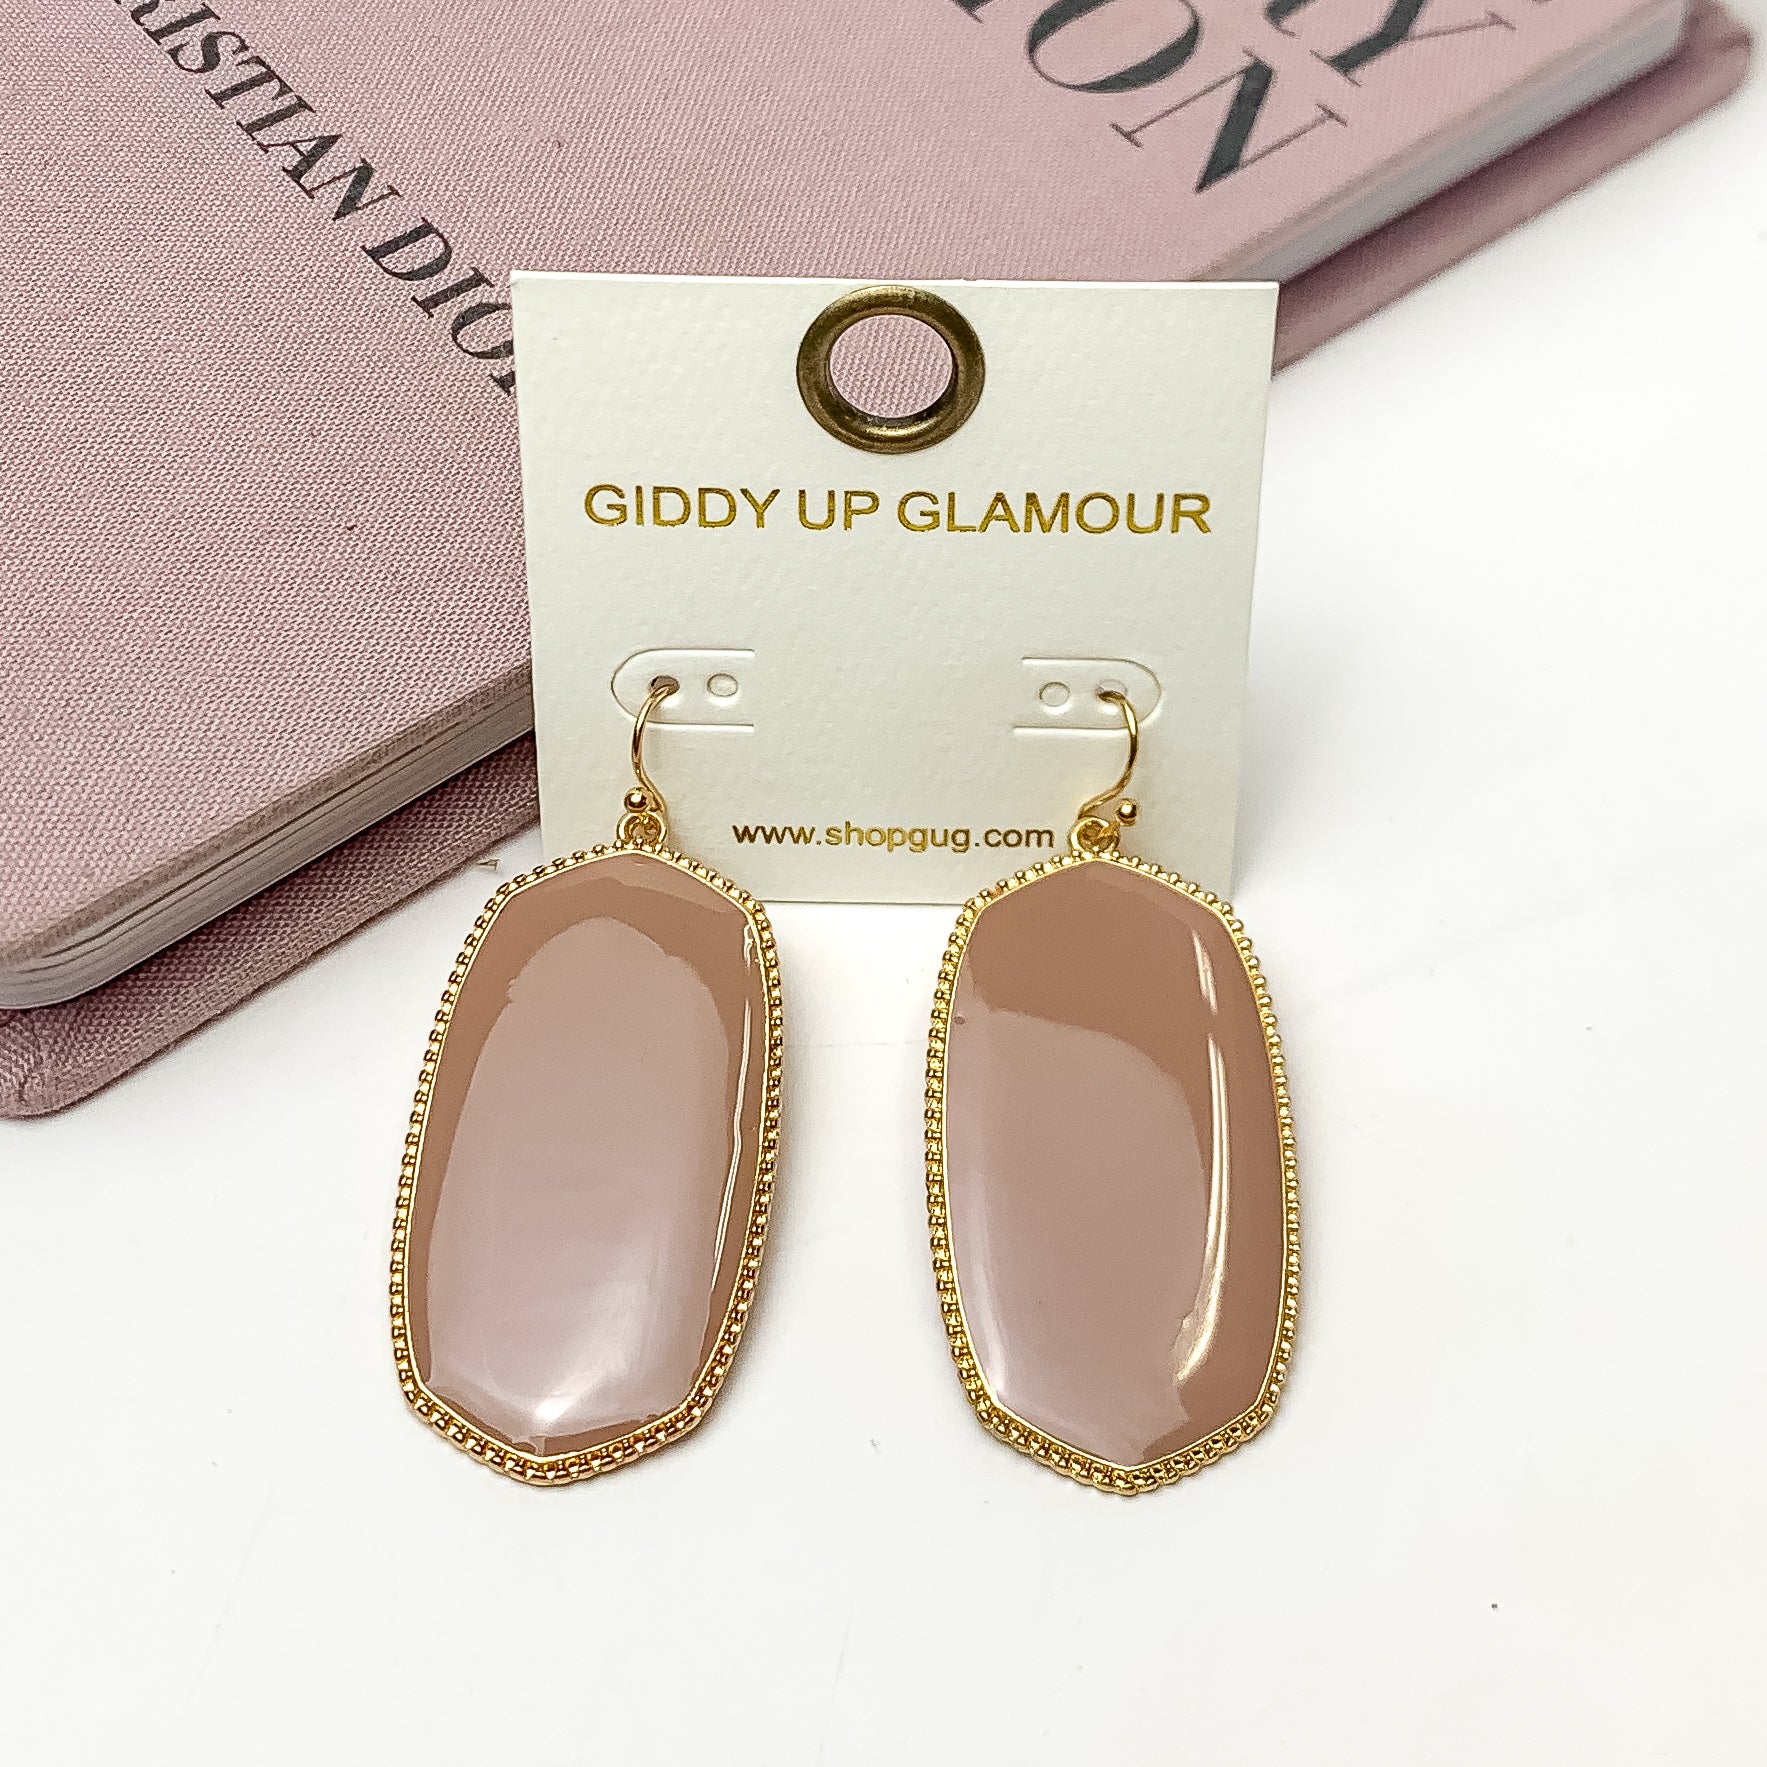 Southern Charm Oval Earrings in Mauve Pink. These earrings are laying on a pink book with a white background behind the book.